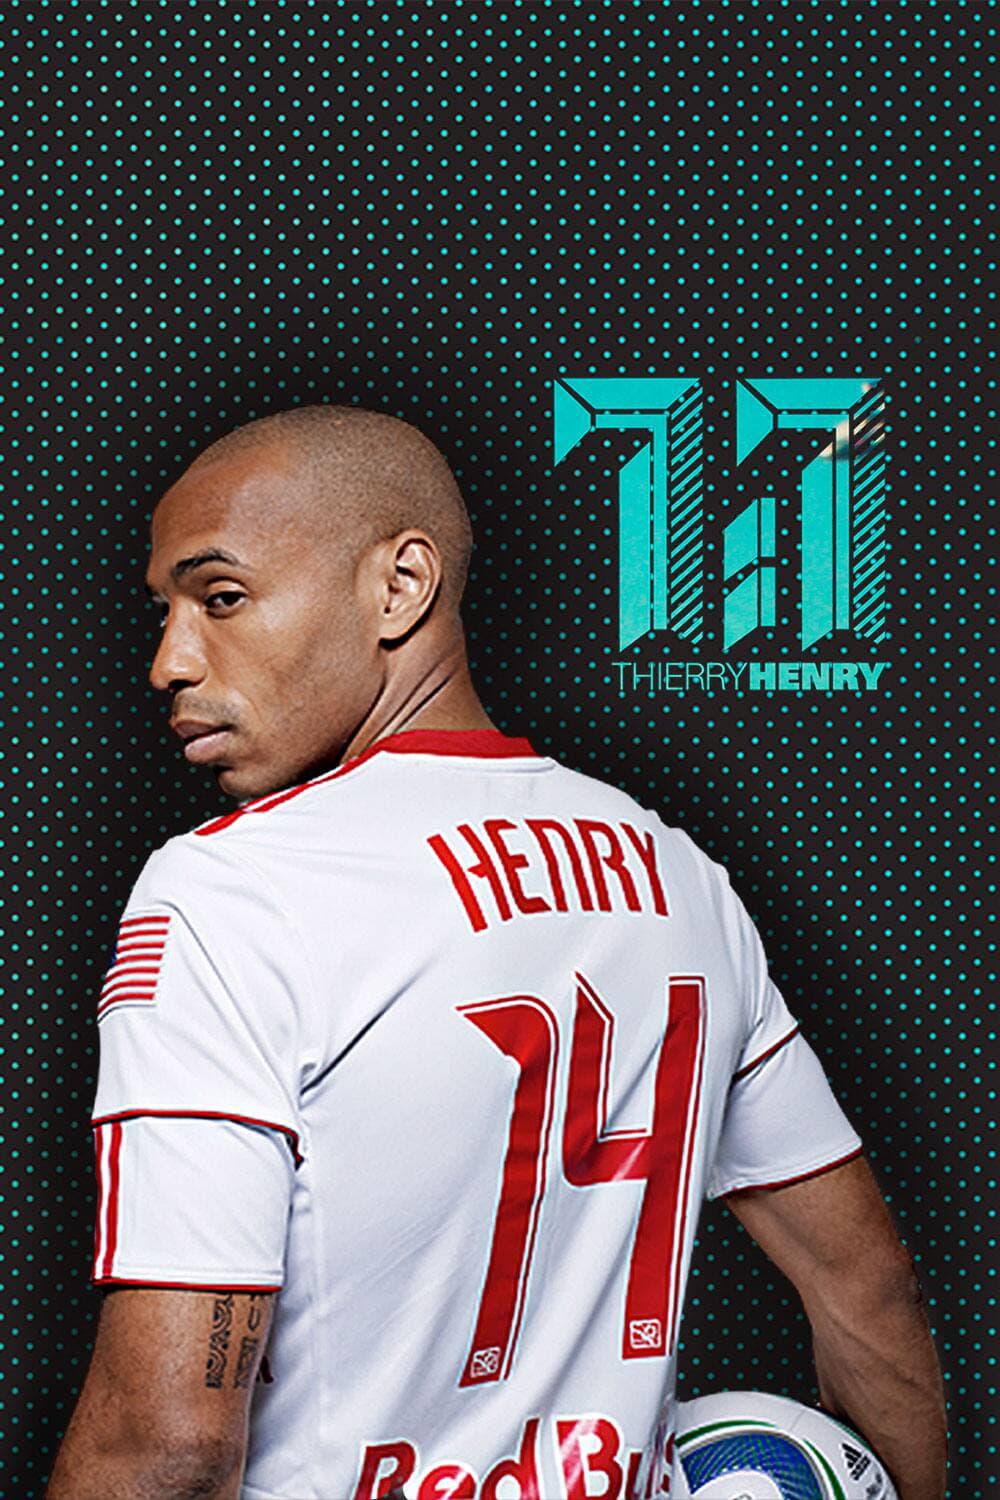 1:1 Thierry Henry poster